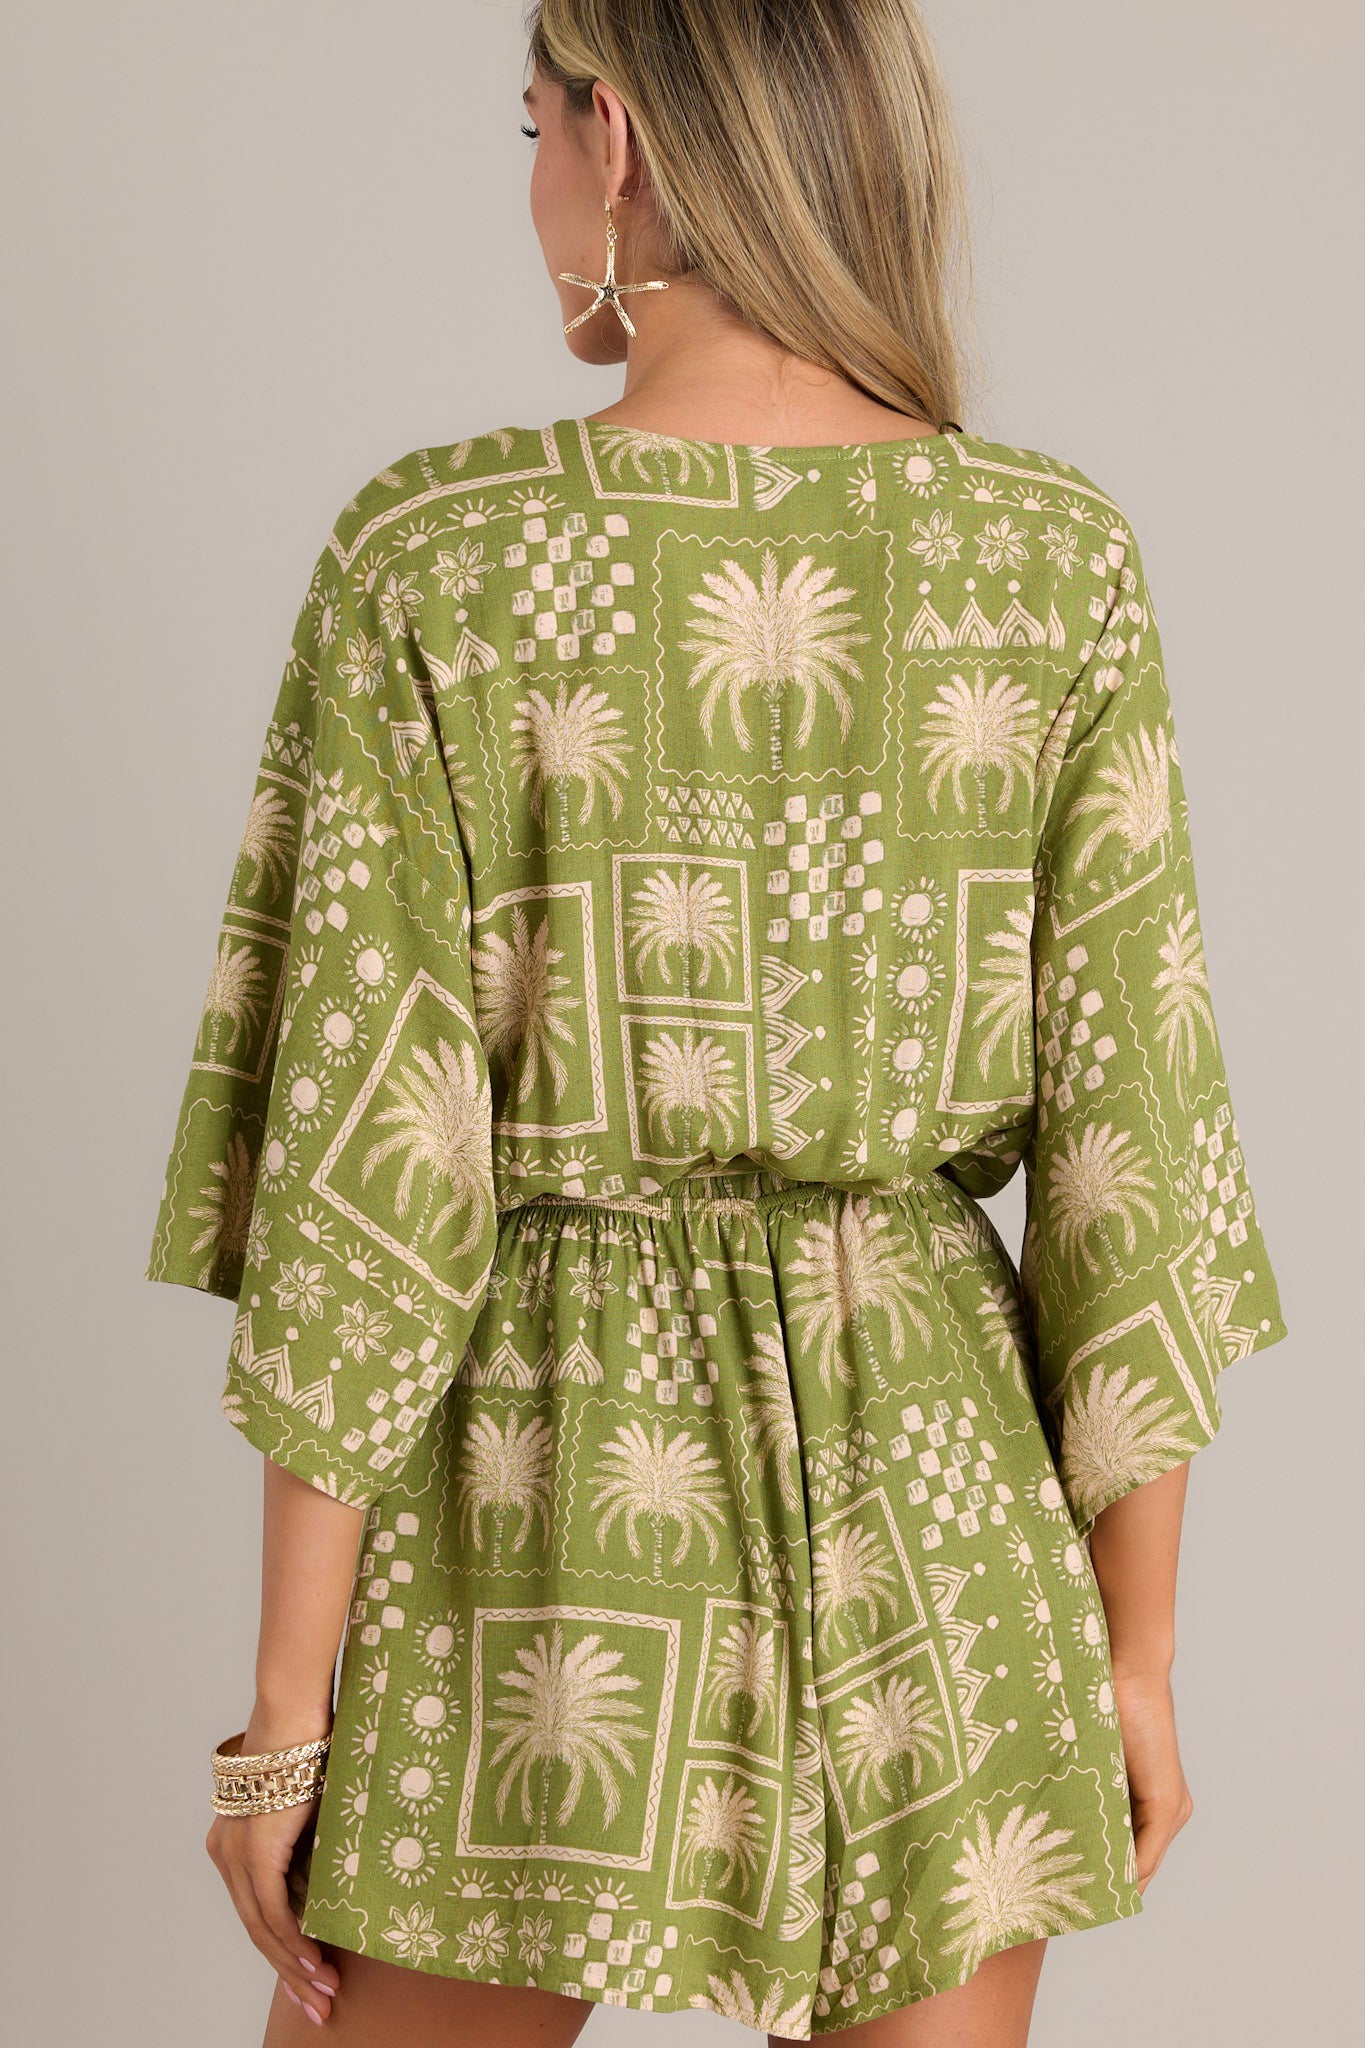 Back view of a green romper showcasing the elastic waistband, self-tie belt, and dolman sleeves.